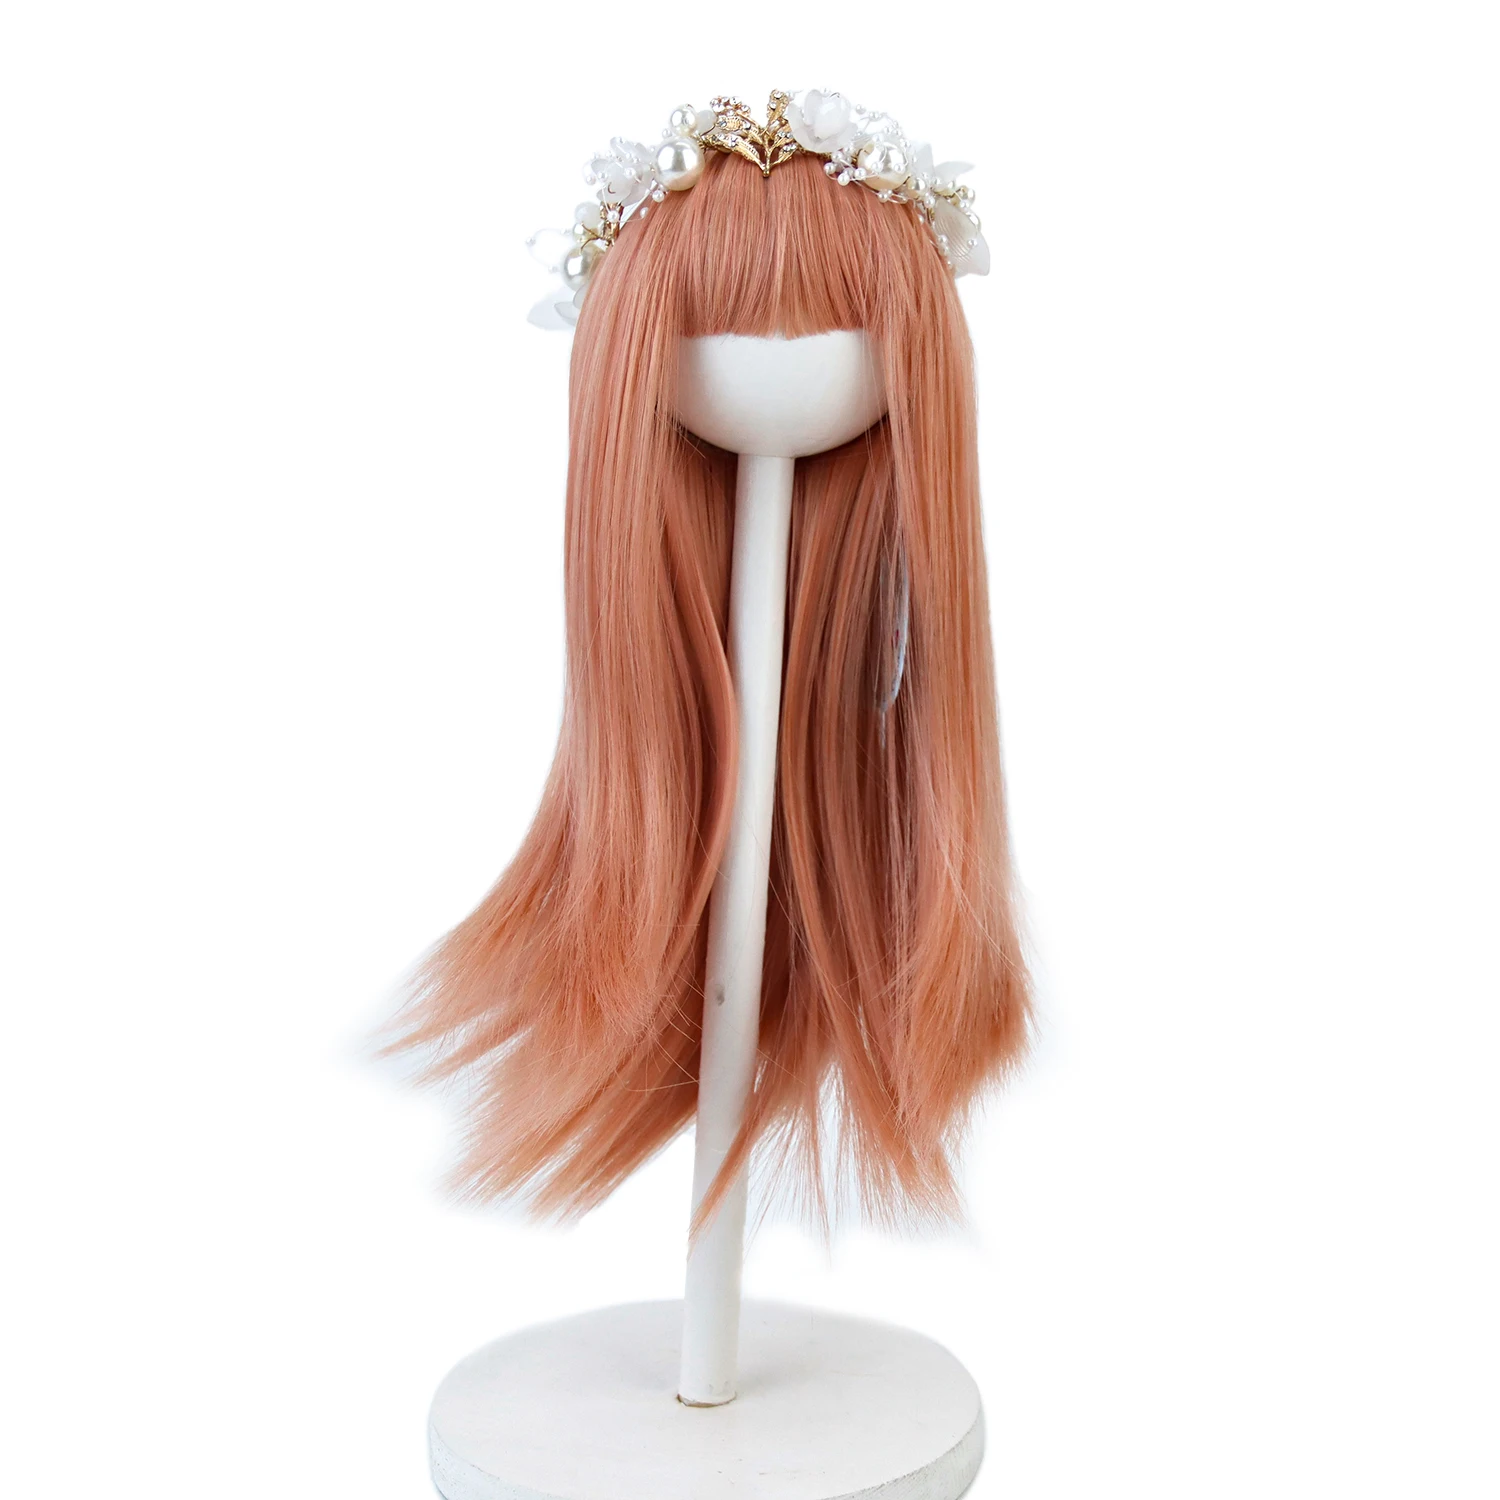 Doll Wig Long Natural Straight With Bangs Heat Resistant Synthetic Fiber Girls Doll Hair For 18'' American Doll